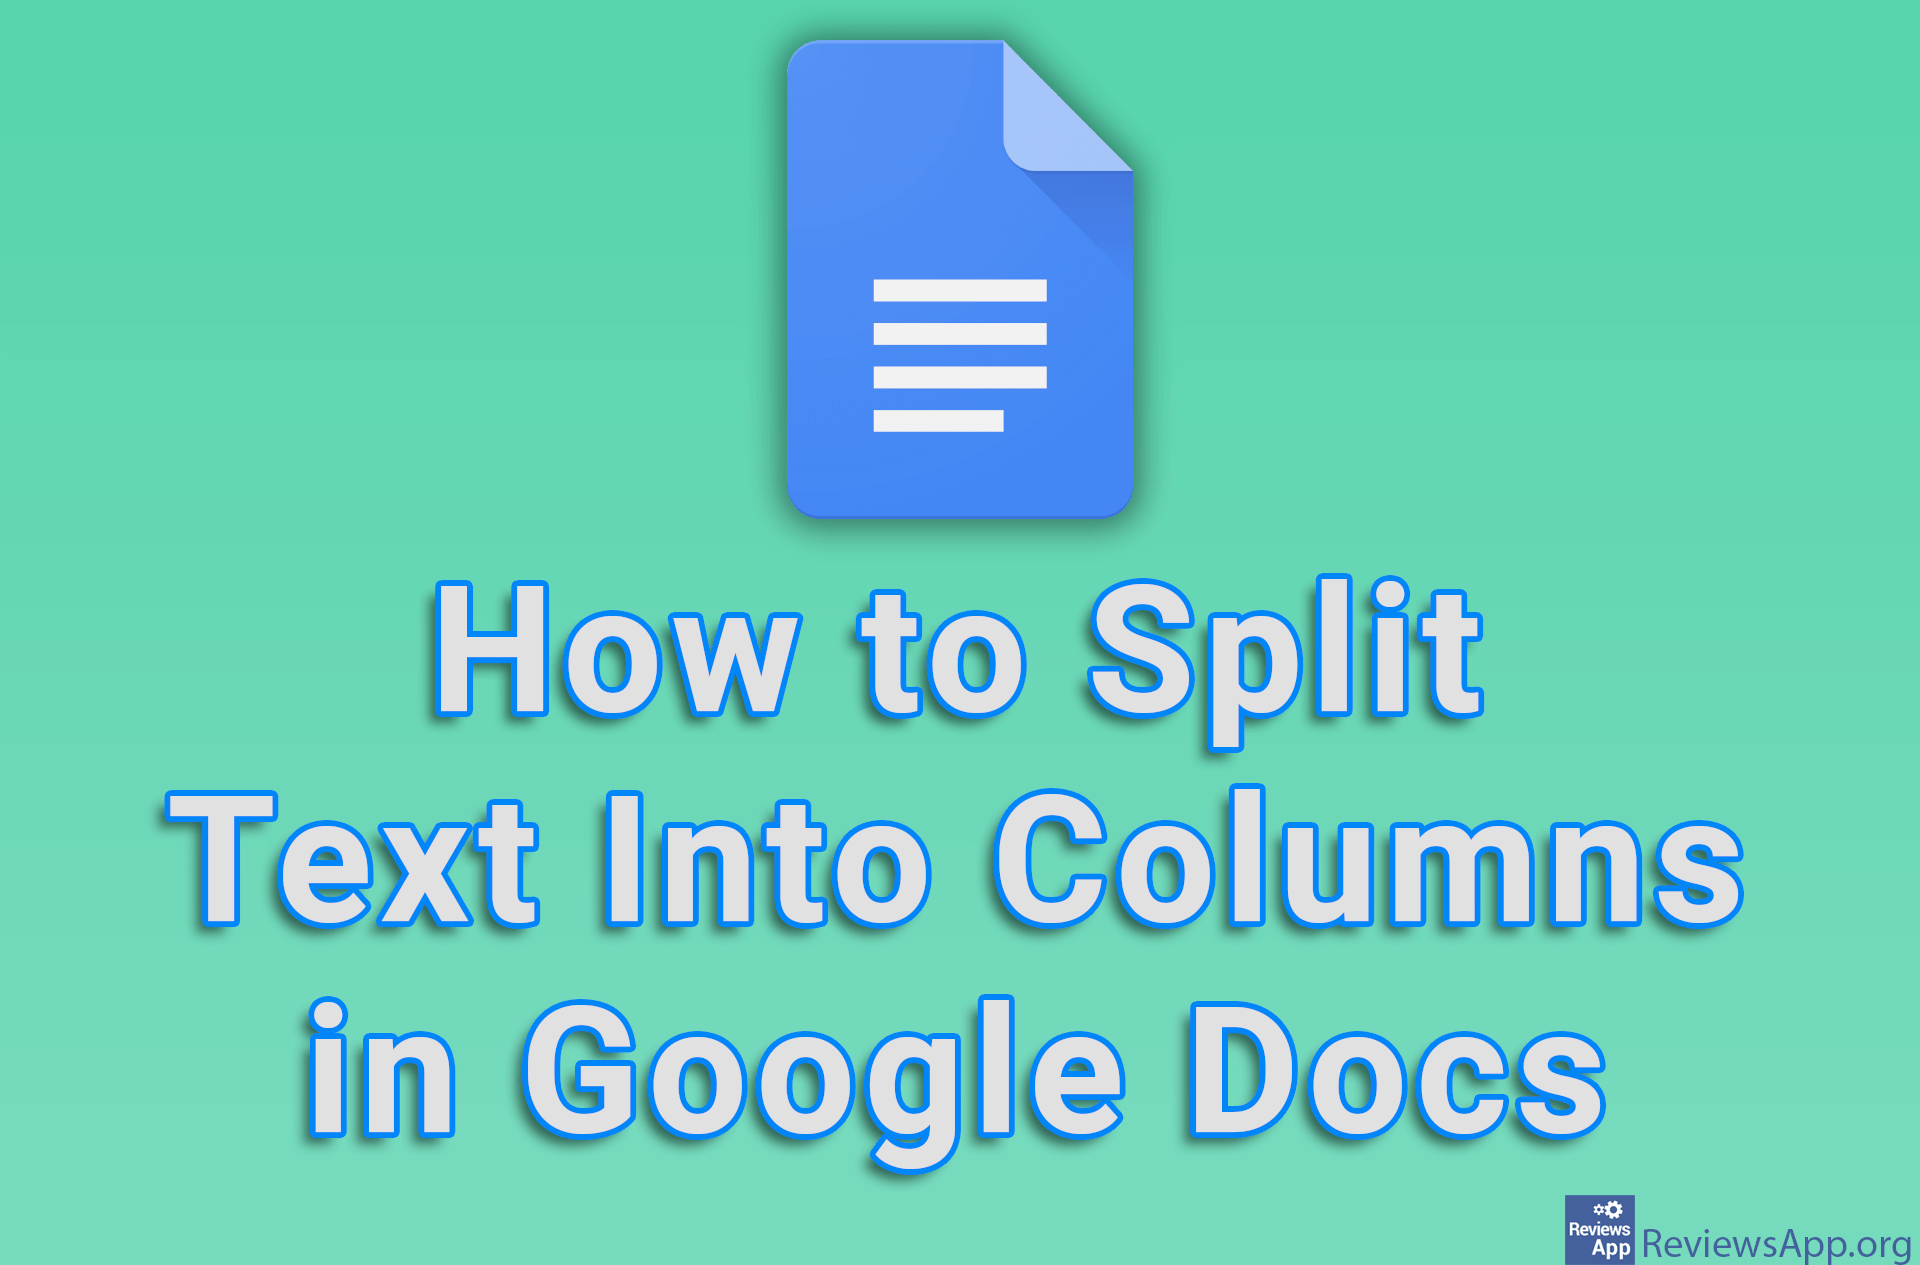 How to Split Text Into Columns in Google Docs